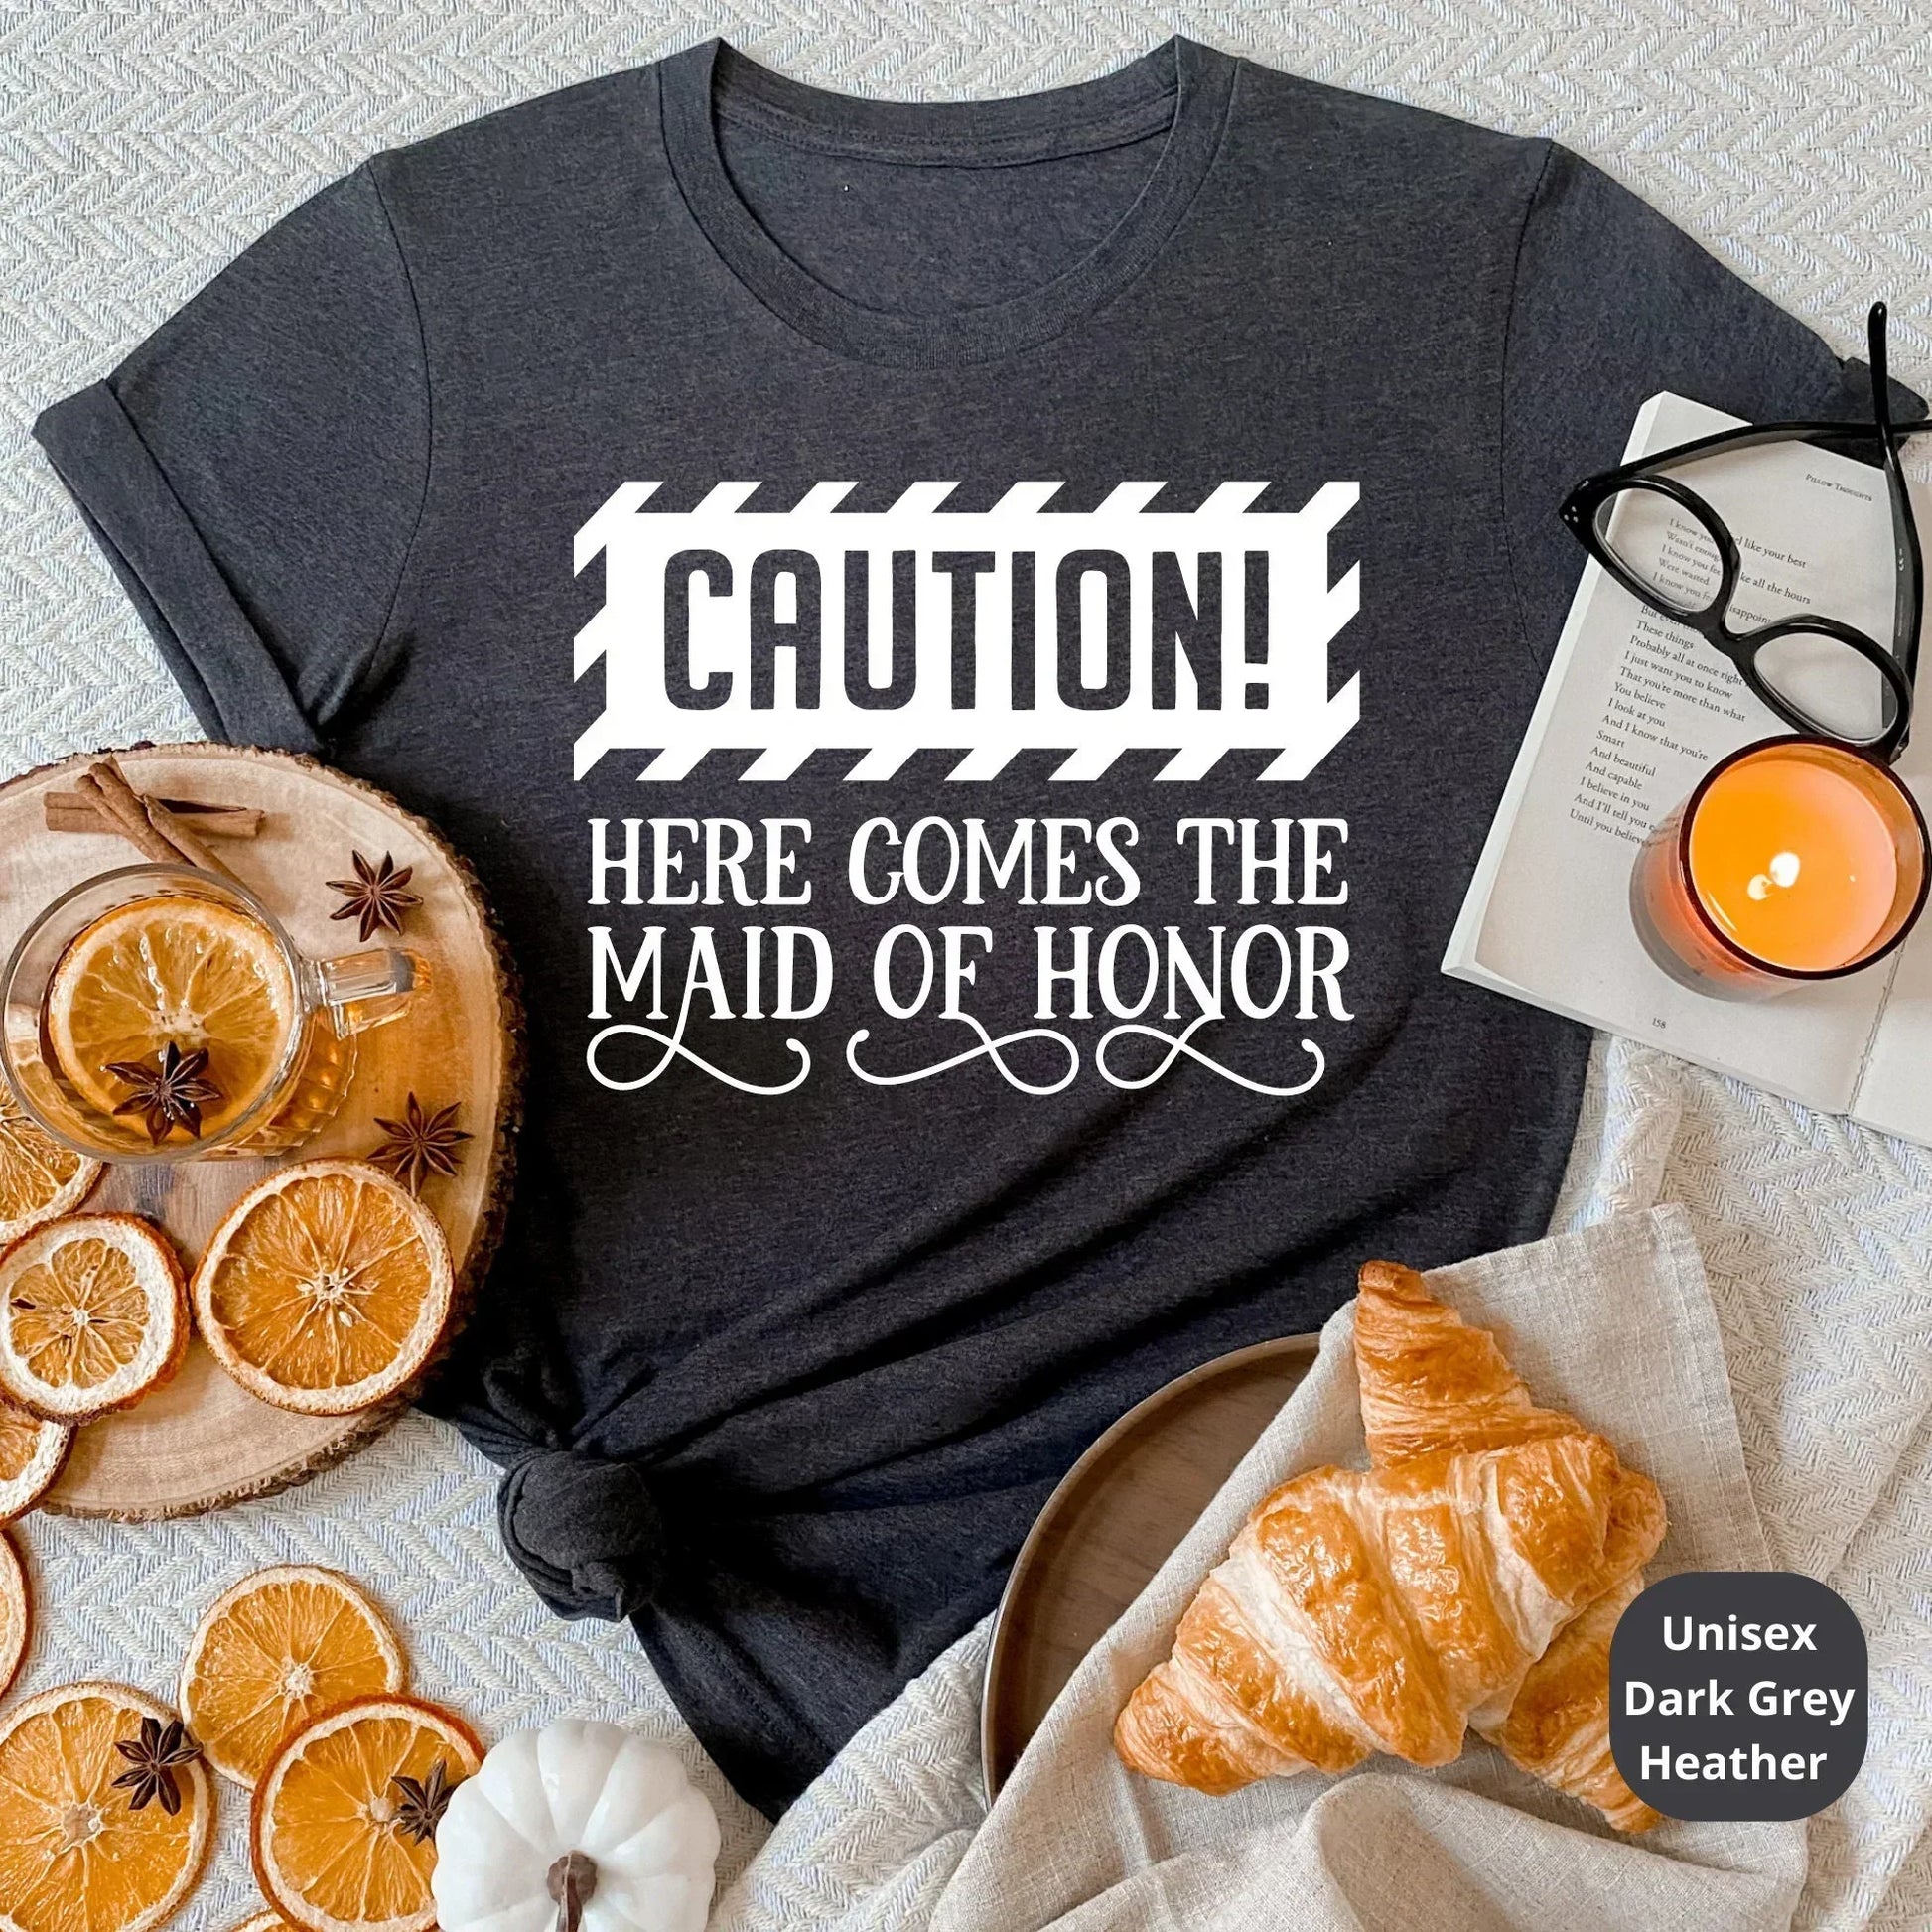 Caution Funny Bachelorette Party Shirts, Funny Bridesmaids Gifts HMDesignStudioUS